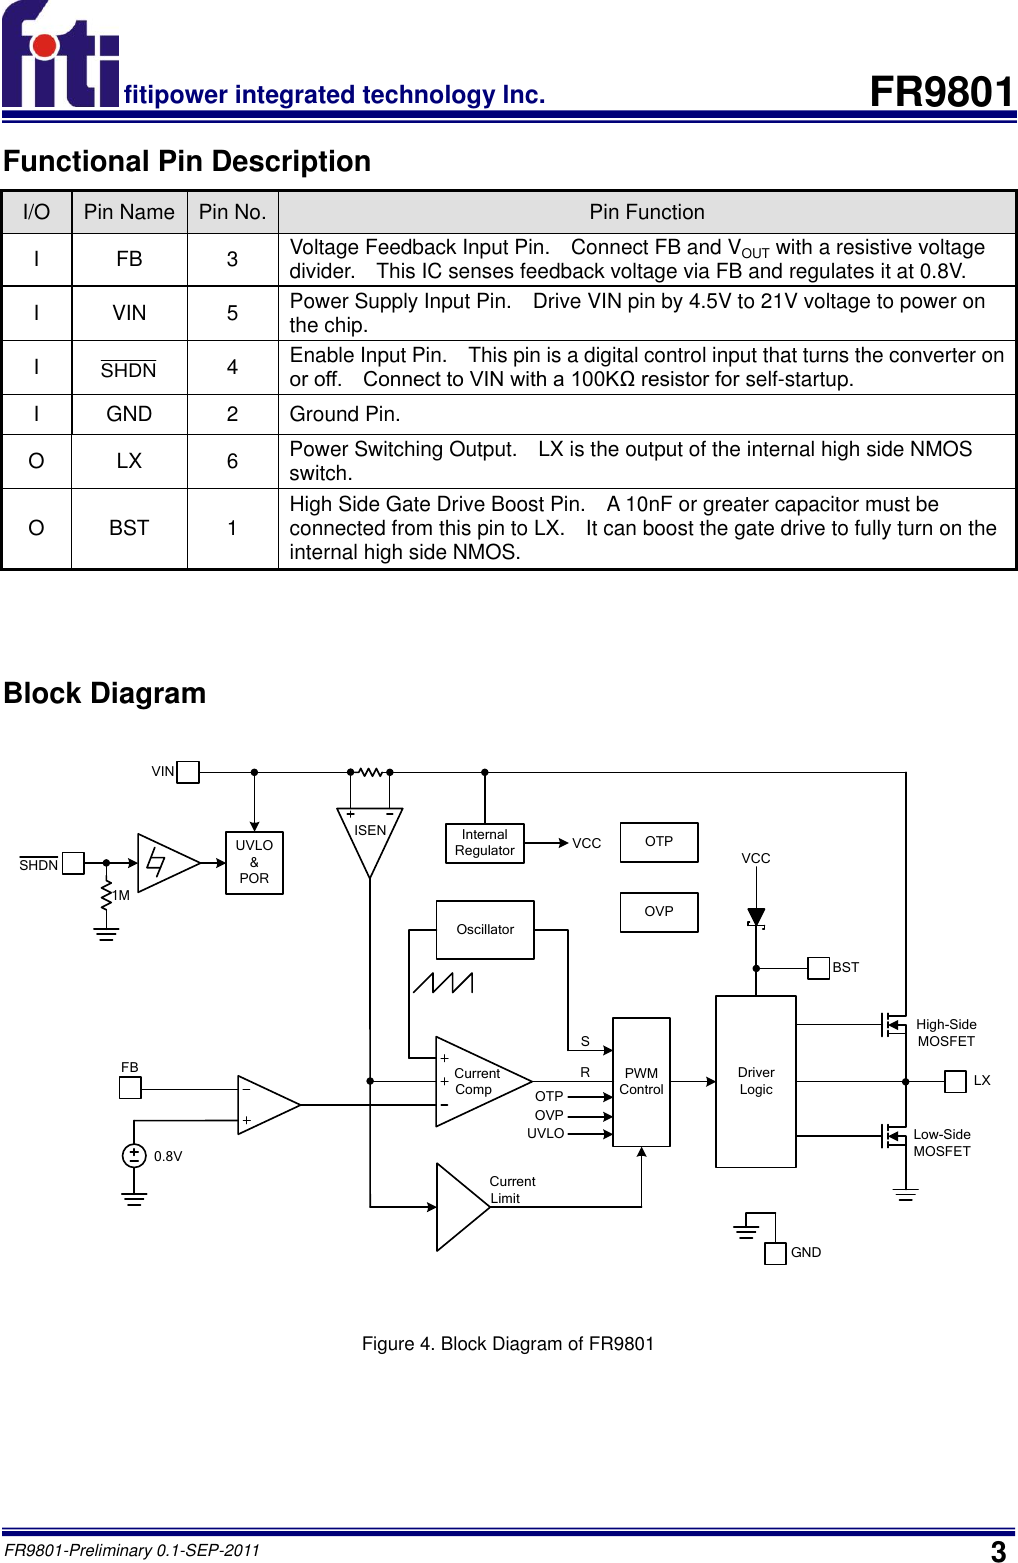 Page 3 of 7 - FR9801 - Datasheet. Www.s-manuals.com. R0.1 Fiti